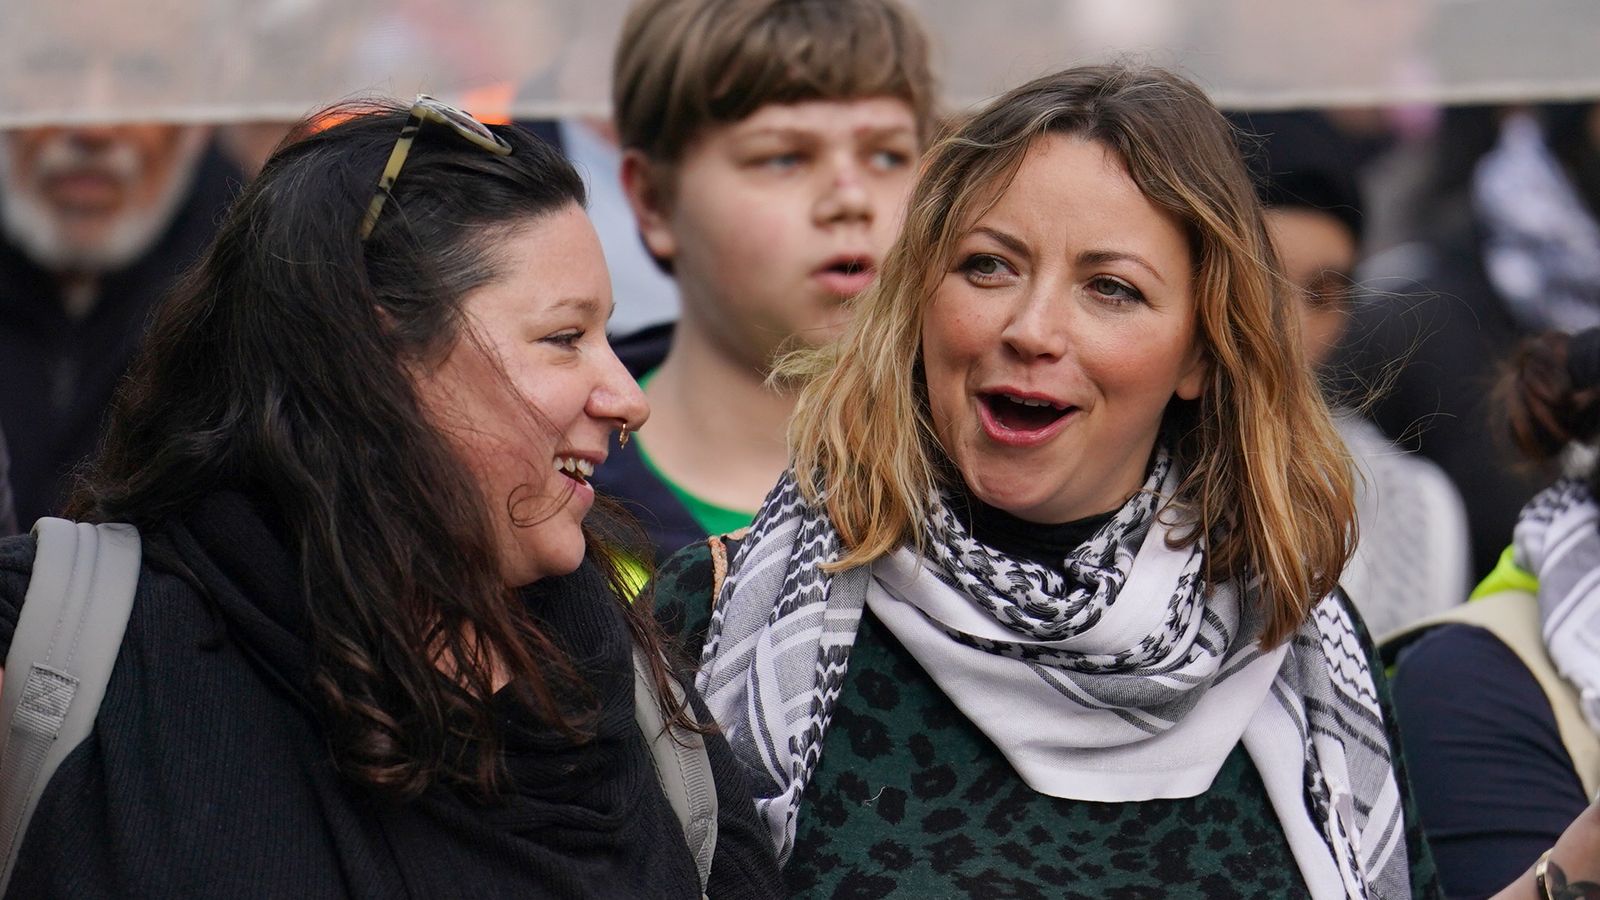 Charlotte Church and Jeremy Corbyn join tens of thousands at pro-Palestine march | UK News